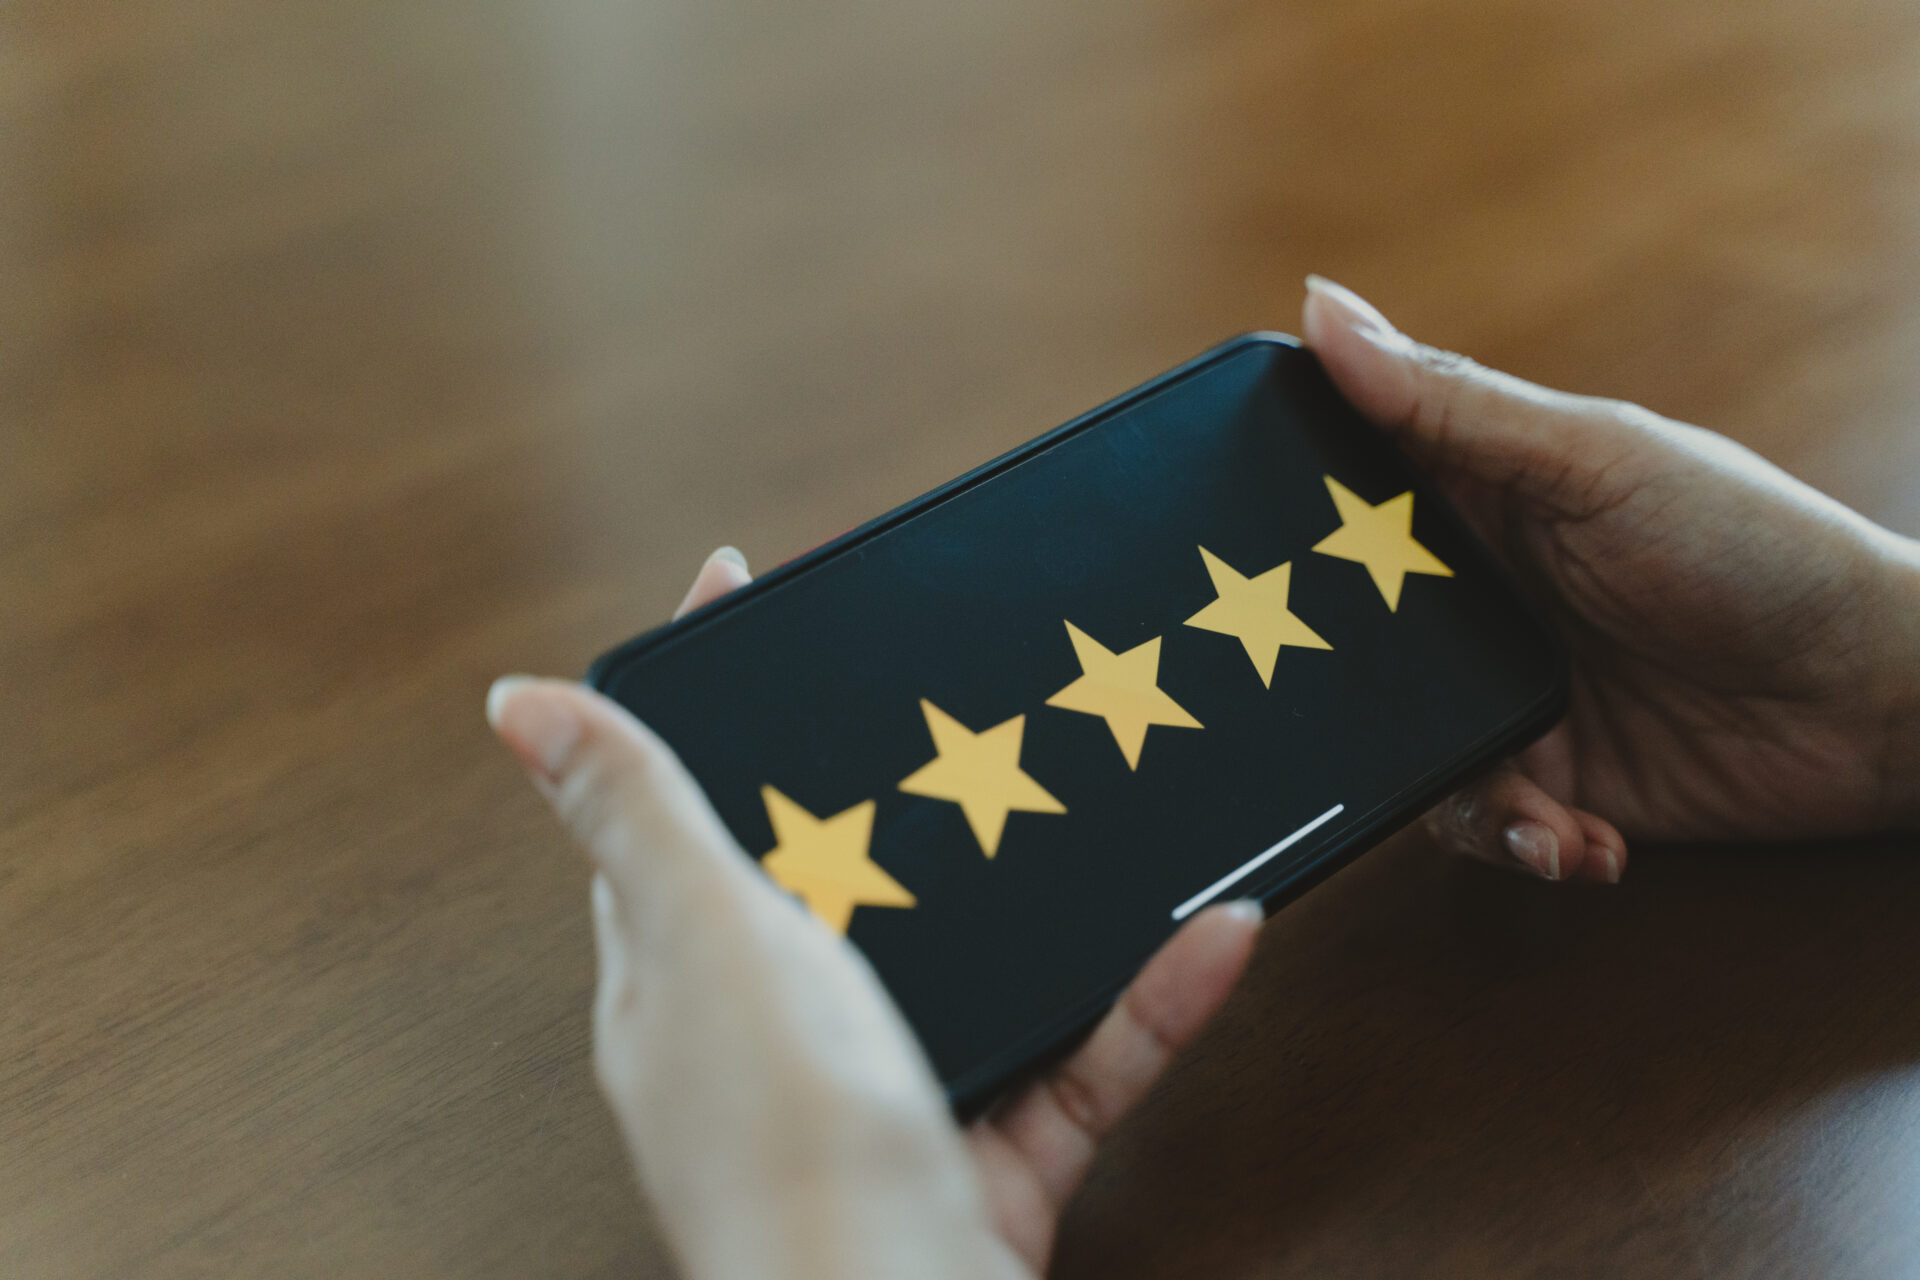 Hands are holding a smartphone with five stars on the screen, demonstrating good online reputation management.